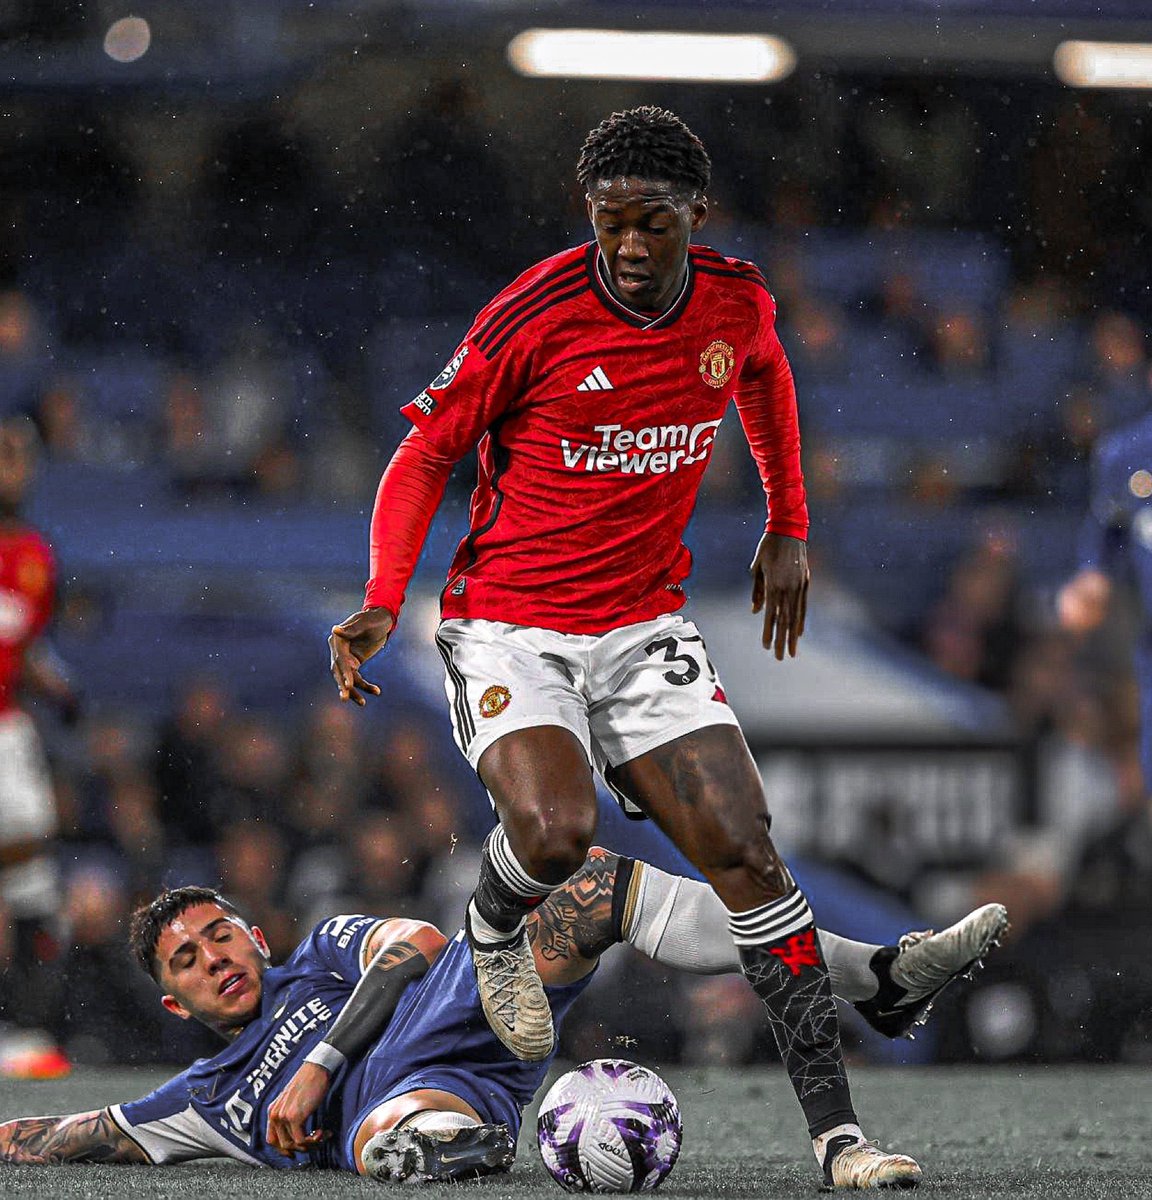 Kobbie Mainoo this season: - UEFA champions league debut - First NT call up and debut - Regular starter in the Man United team - Scored his first Man United goal in the FA cup - A late minute winner to win it for Manchester United against Wolves (his first PL goal) - Nominated…